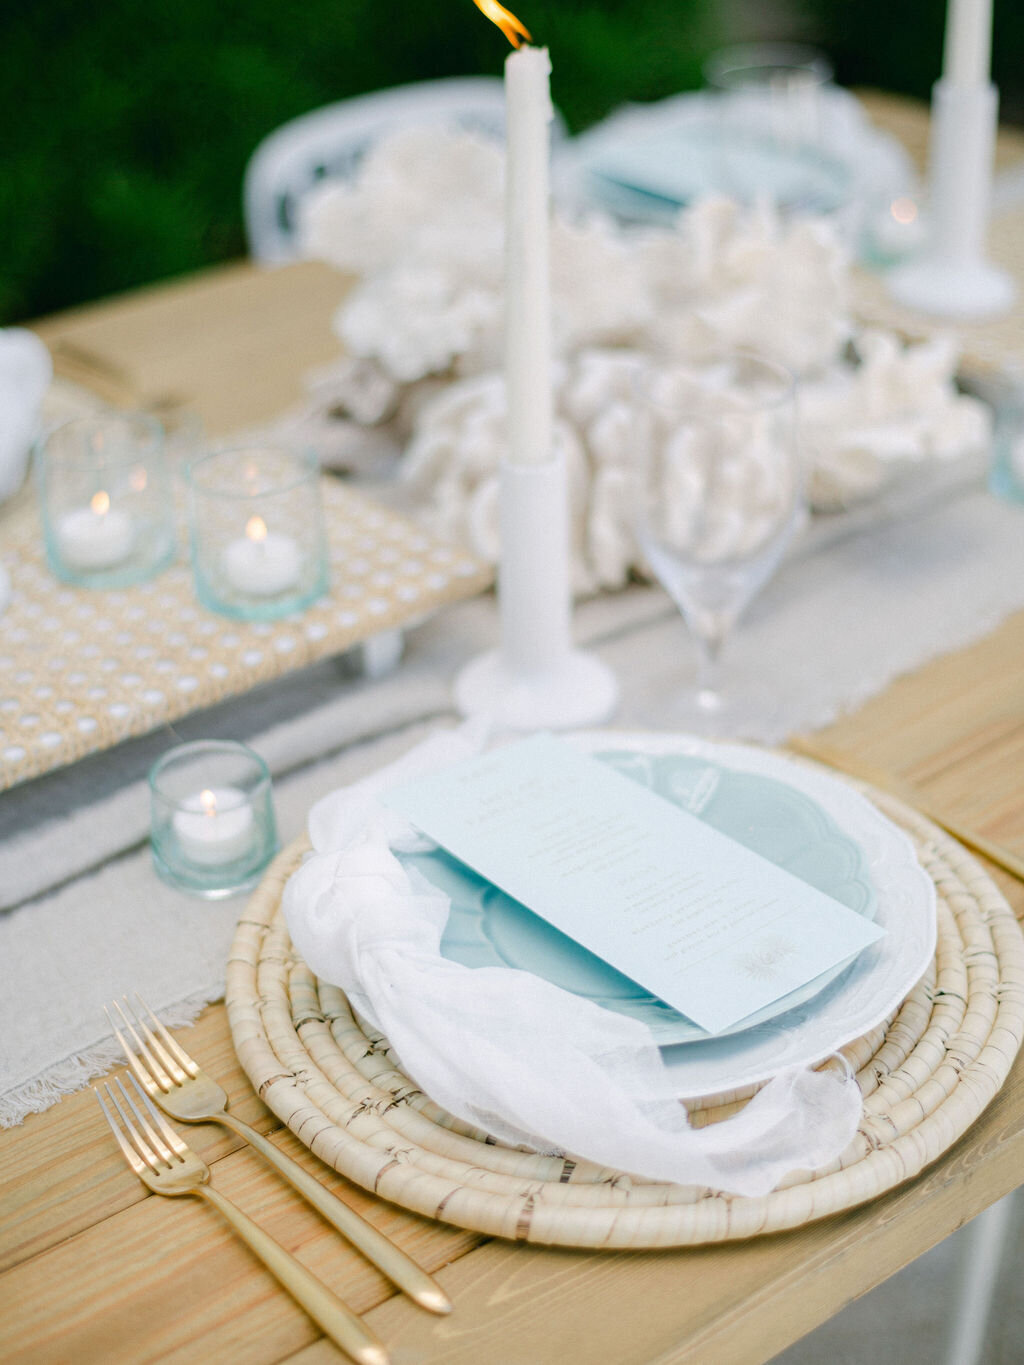 Table setting with Sea glass inspired wedding colors